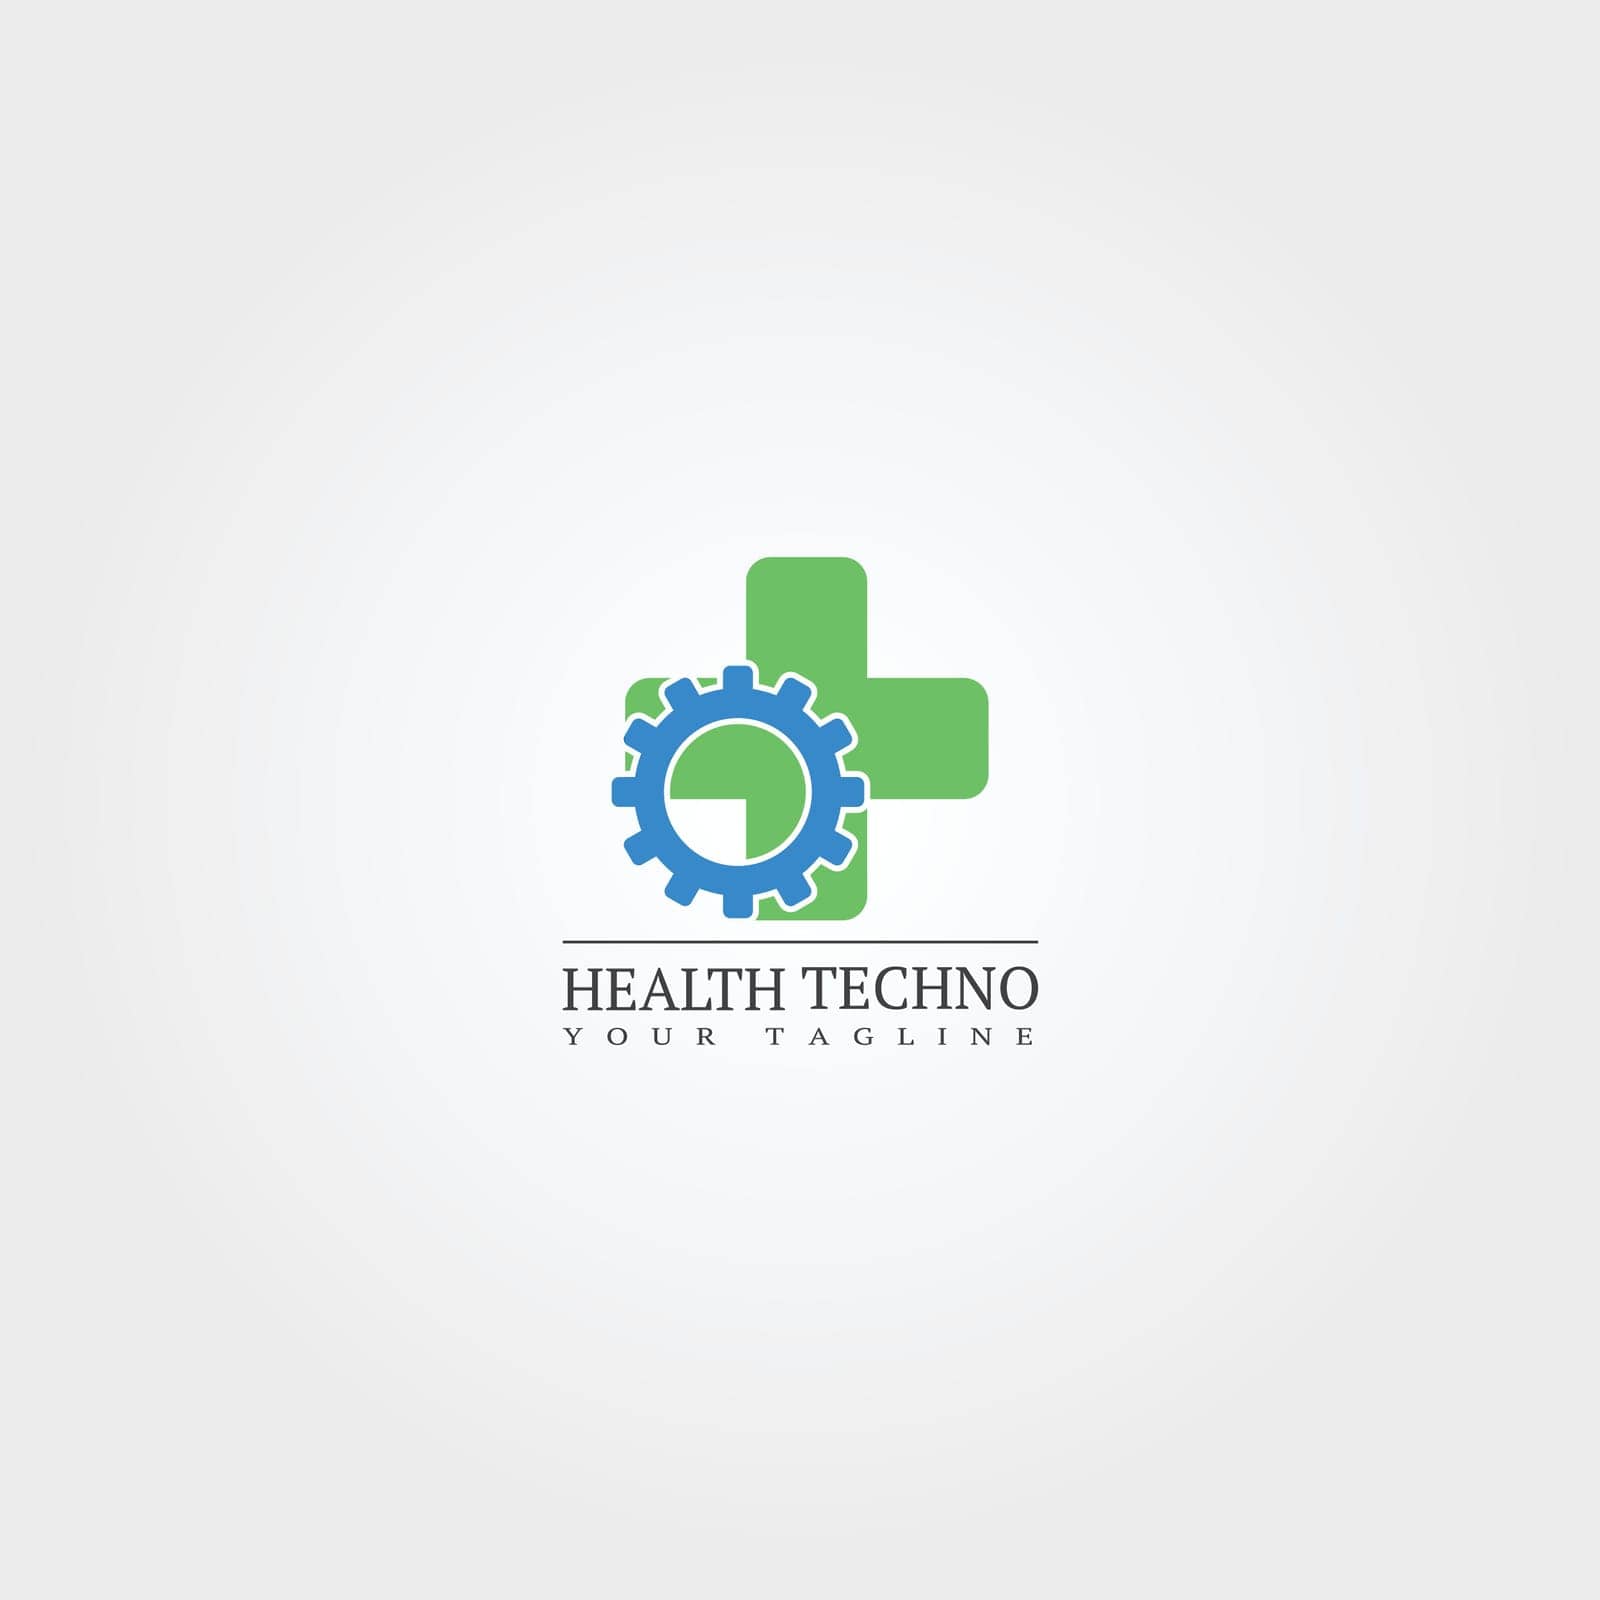 symbol,medical,pharmaceutical,education,sign,simple,logotype,research,solution,logo,connection,element,tech,biology,shape,creative,plus,system,laboratory,background,science,care,template,idea,concept,icon,isolated,smart,network,modern,web,identity,design,company,vector,power,human,graphic,digital,innovation,mind,business,center,health,medicine,abstract,technology,illustration,atom by ogqcorp